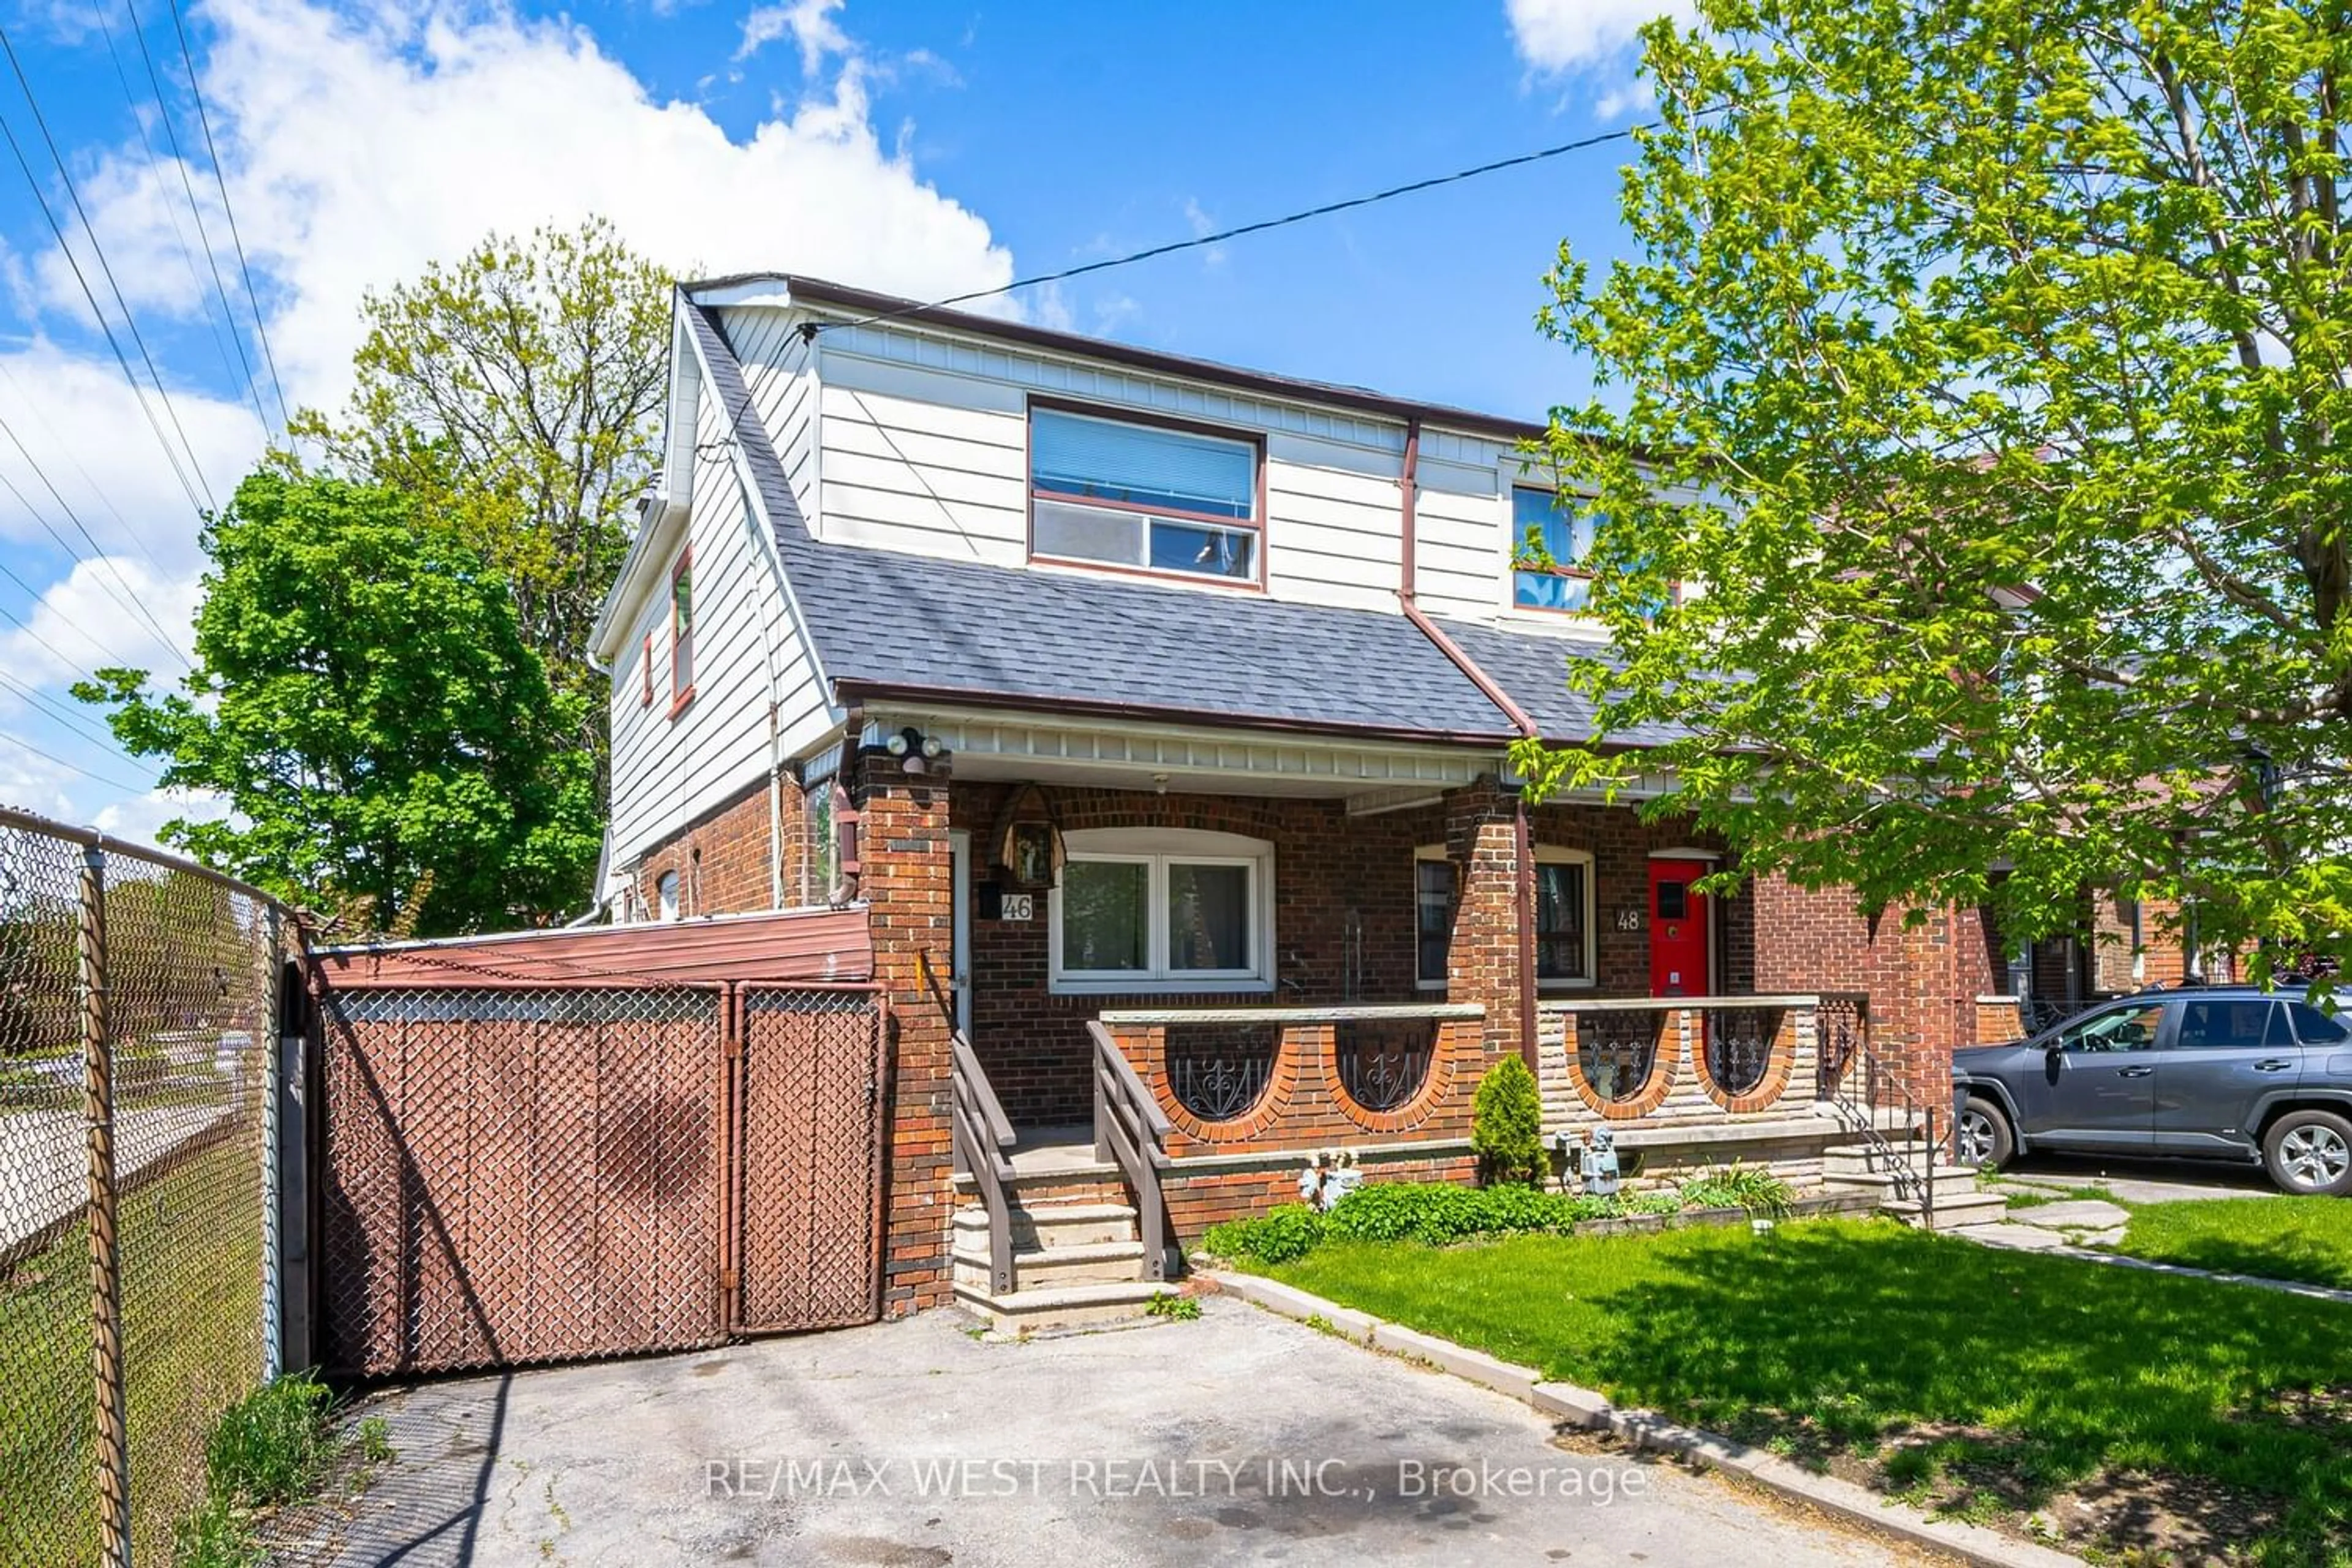 Frontside or backside of a home for 46 Carrick Ave, Toronto Ontario M6N 3J5